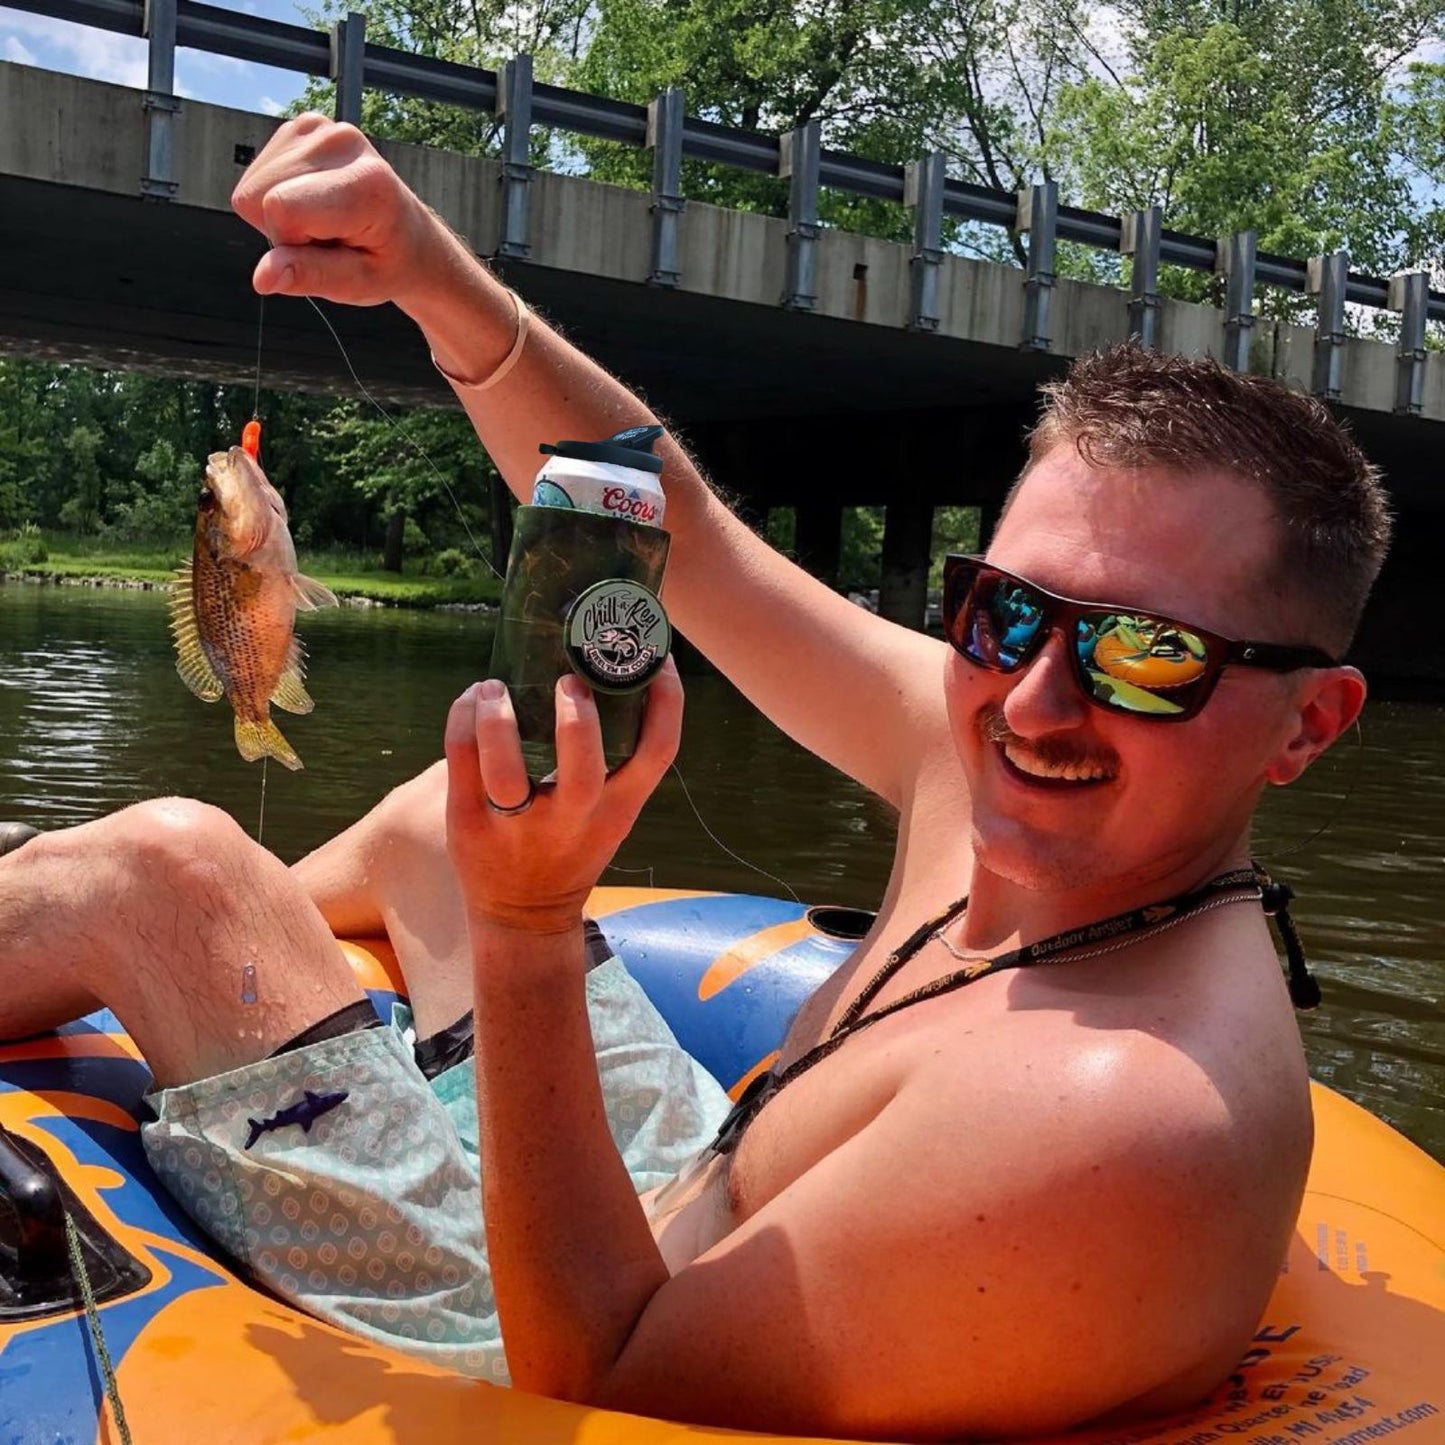 Man on an inflatable tube in a river, smiling, holding a fishing line with a small fish on the hook in one hand and a can of beer wrapped in what looks like a Shark Tank product—an Original Chill-N-Reel by Chill-N-Reel—in the other. He is wearing sunglasses and has short hair, with a bridge and trees in the background.